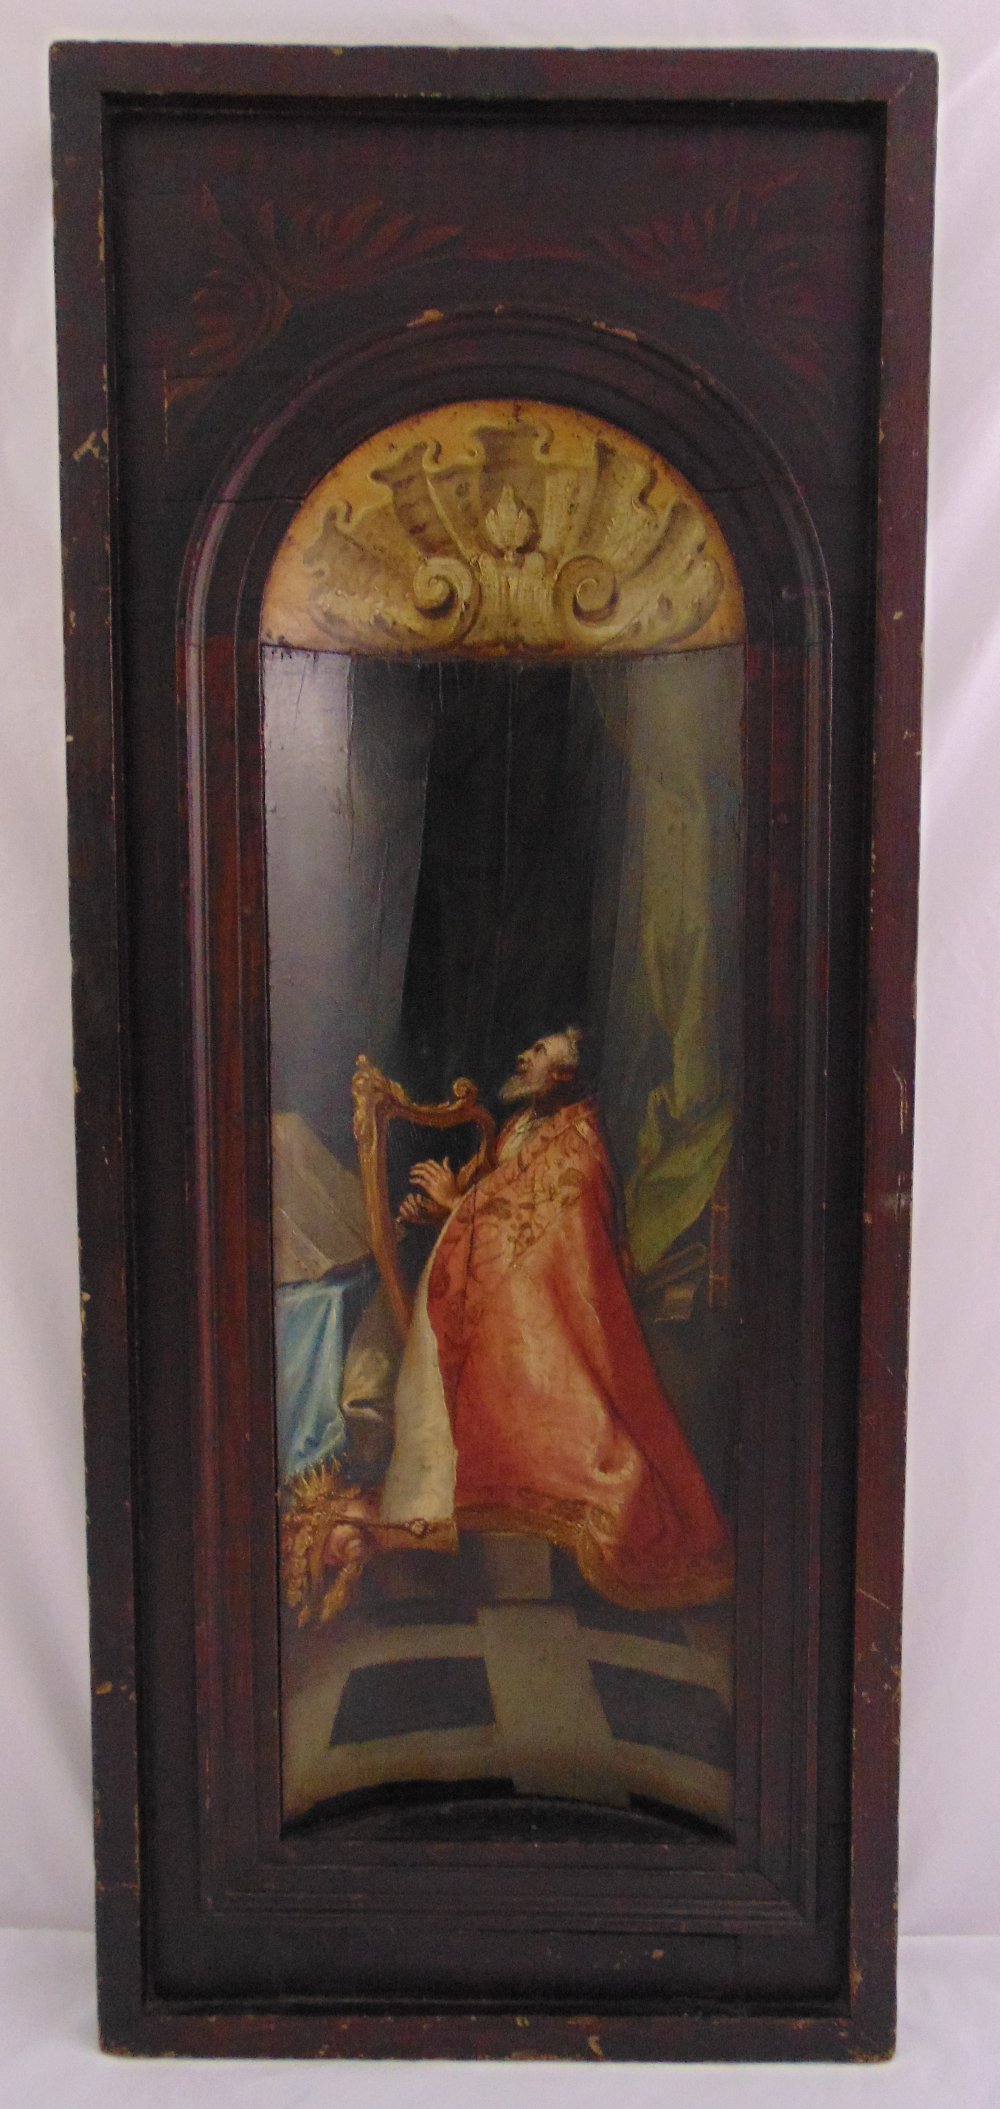 An 18th century continental oil on canvas of a religious figure playing a harp within a curved